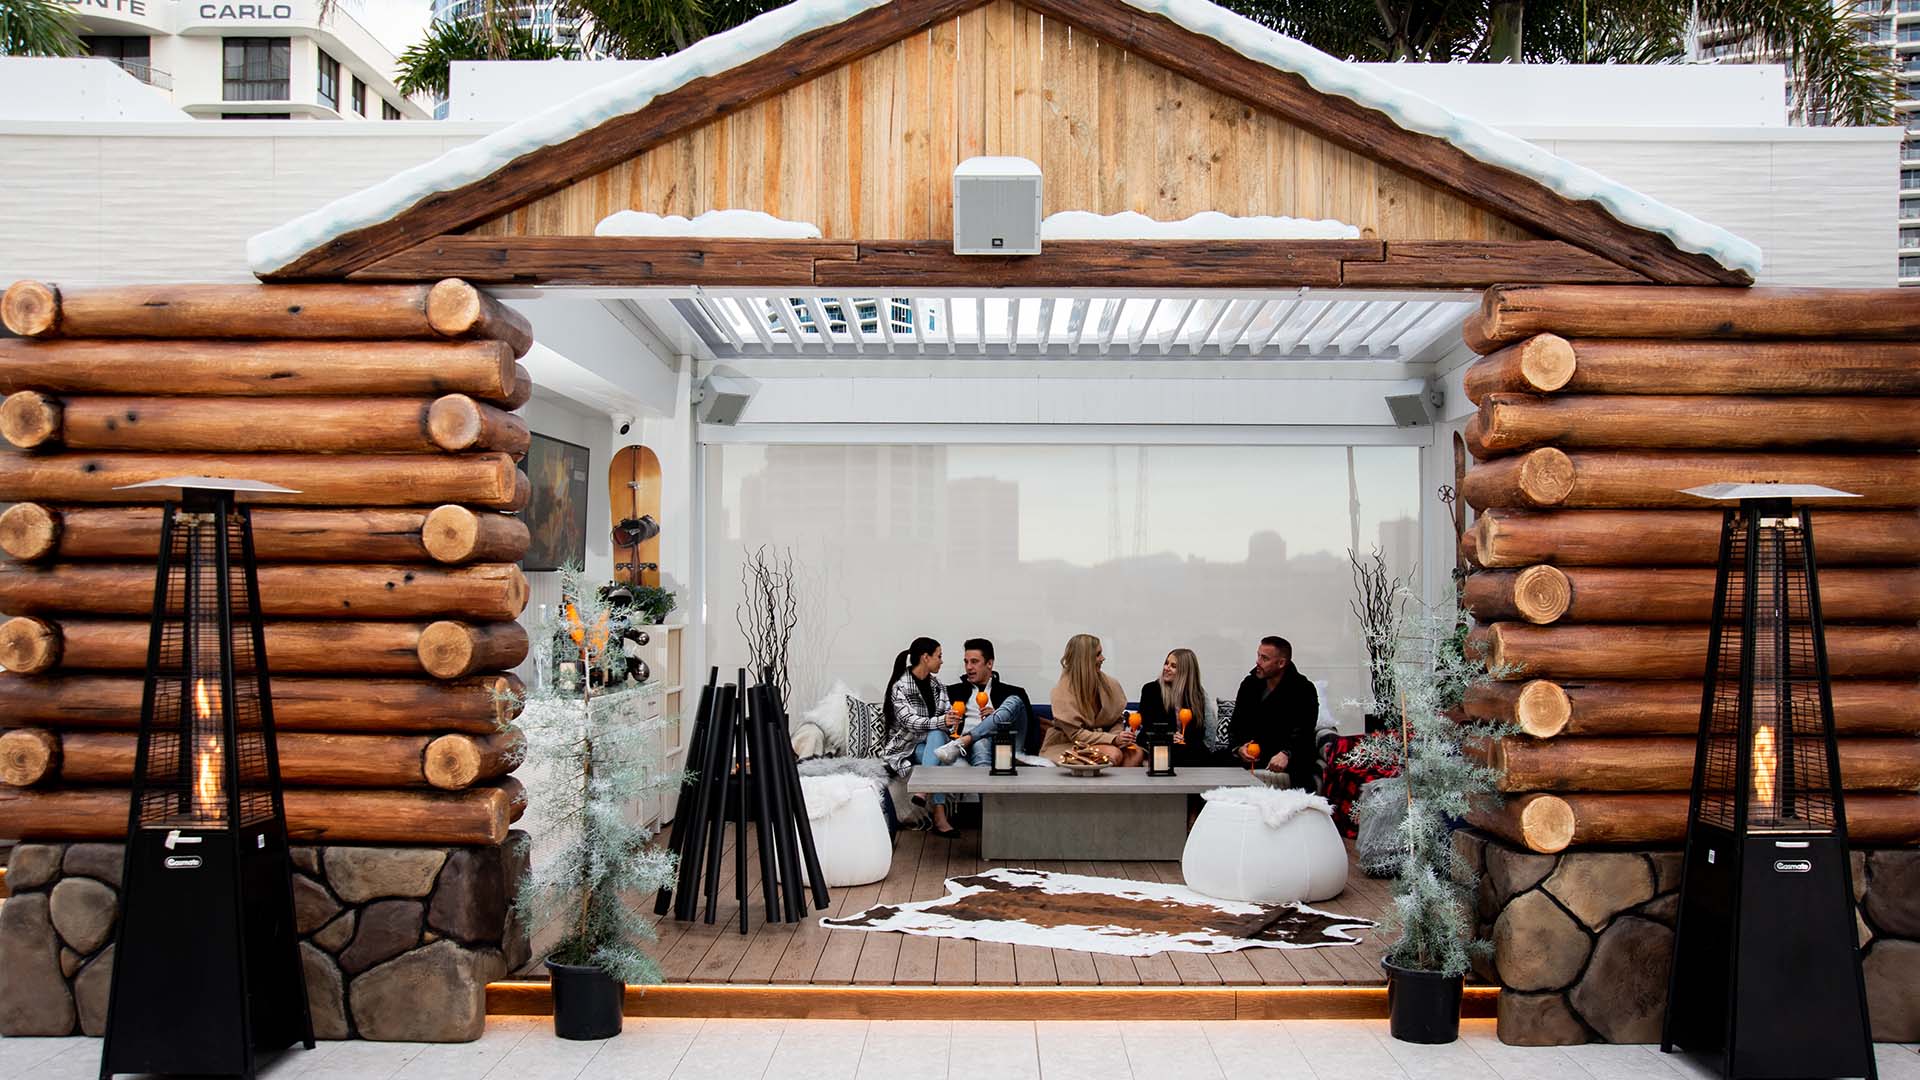 The Gold Coast's Rooftop Beach Club Is Turning Into a Snowy Alpine Lodge with Ice Skating Again This Winter